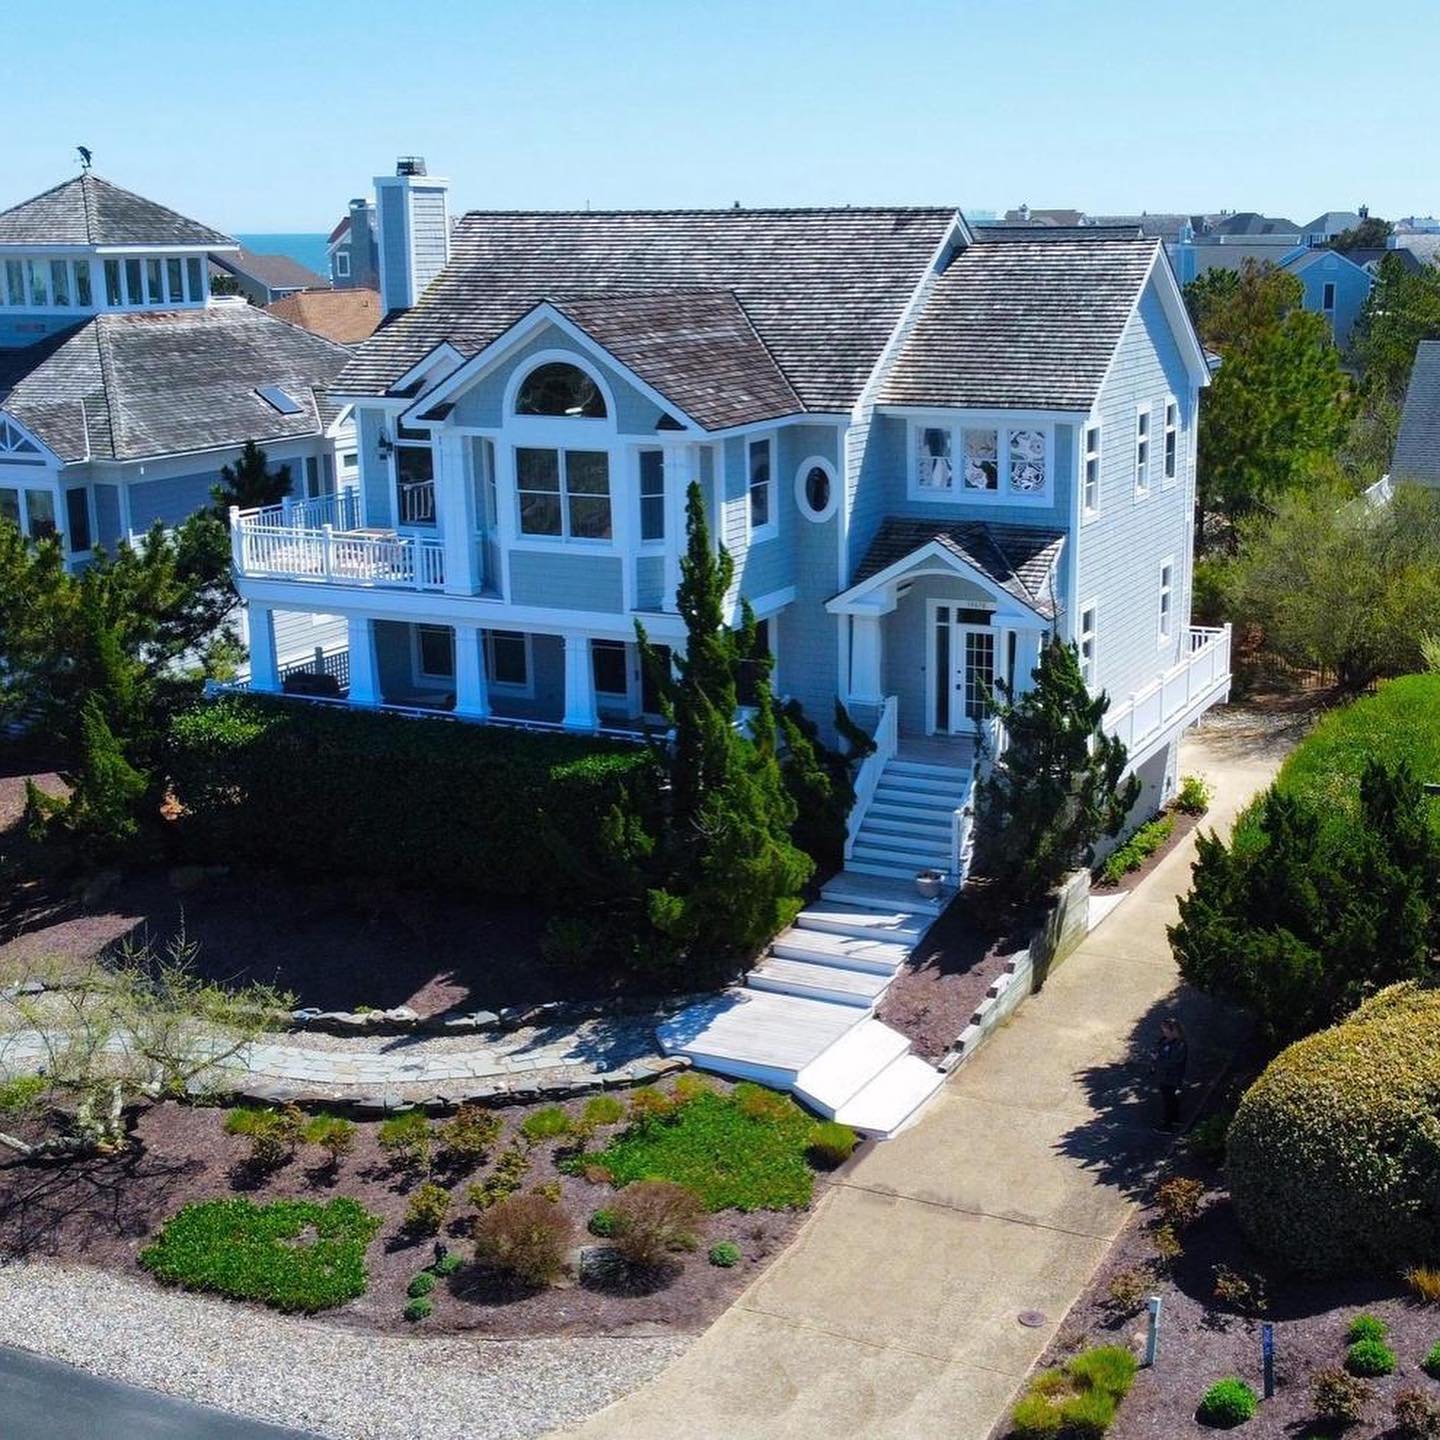 This beautiful beach house just hit the market! 🌊🐚🏠

Crafted with the highest level of quality and attention to detail, this exquisite home is only steps from one of the most desirable private beaches on the Delaware Coast. Elegantly appointed wit